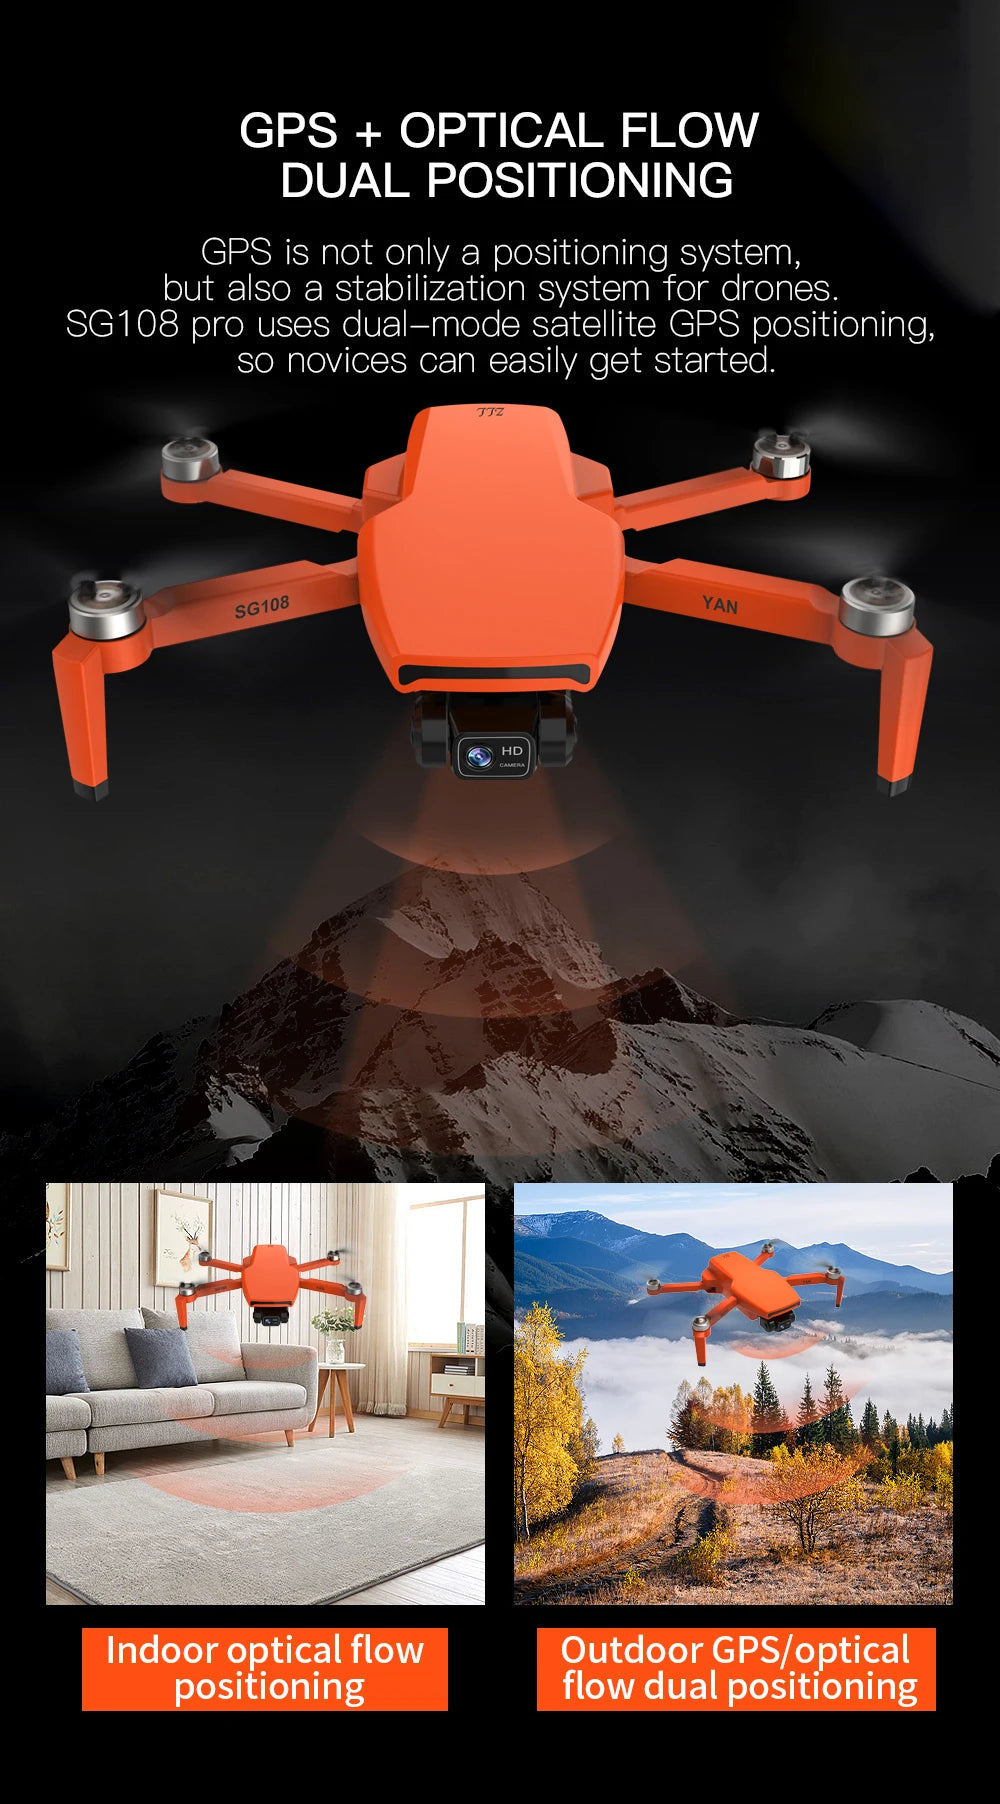 G108 Pro MAx Drone, GPS OPTICAL FLOW DUAL POSITIONING GPS is not only a